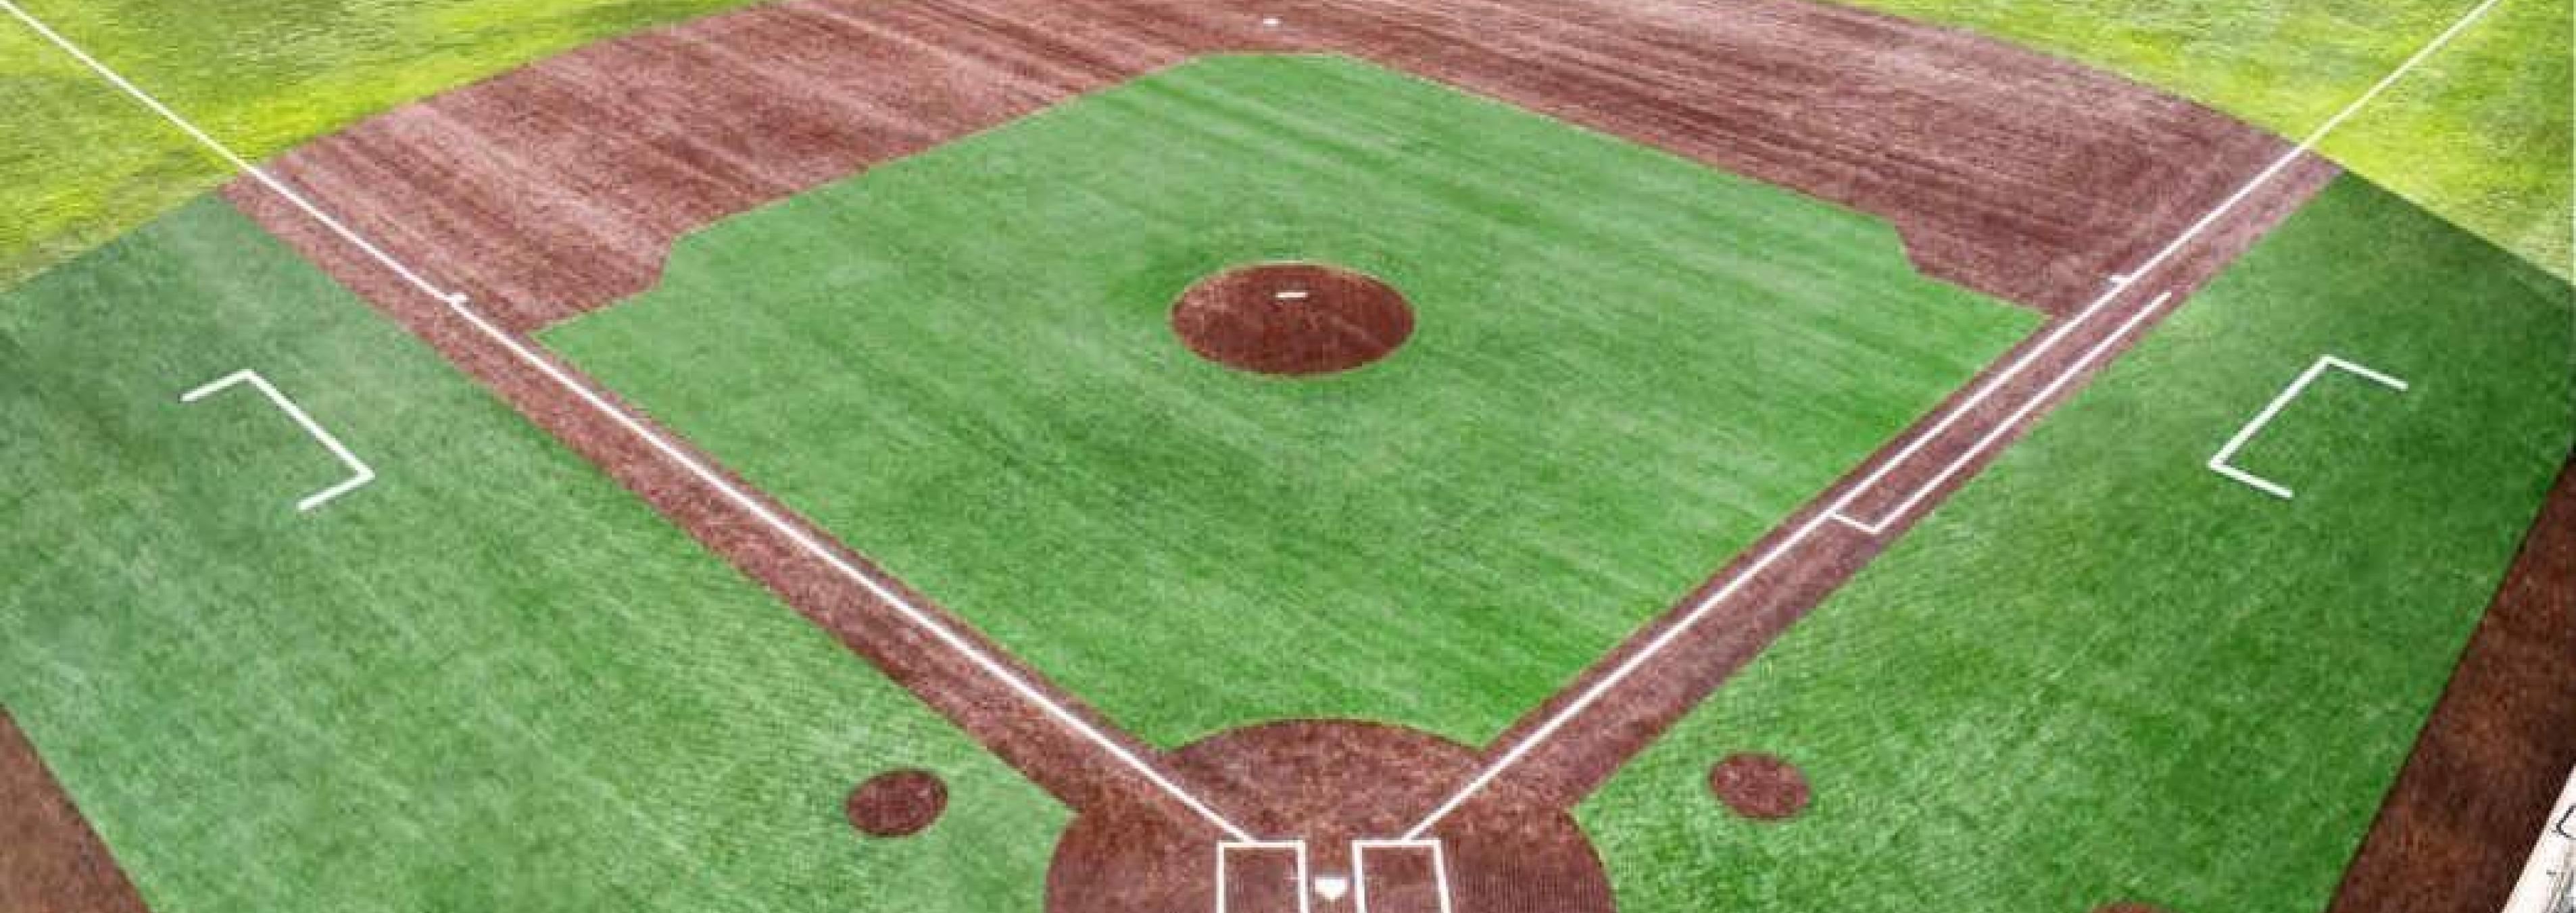 A rendering of Puget Sound's Baseball Field with planned future turf.